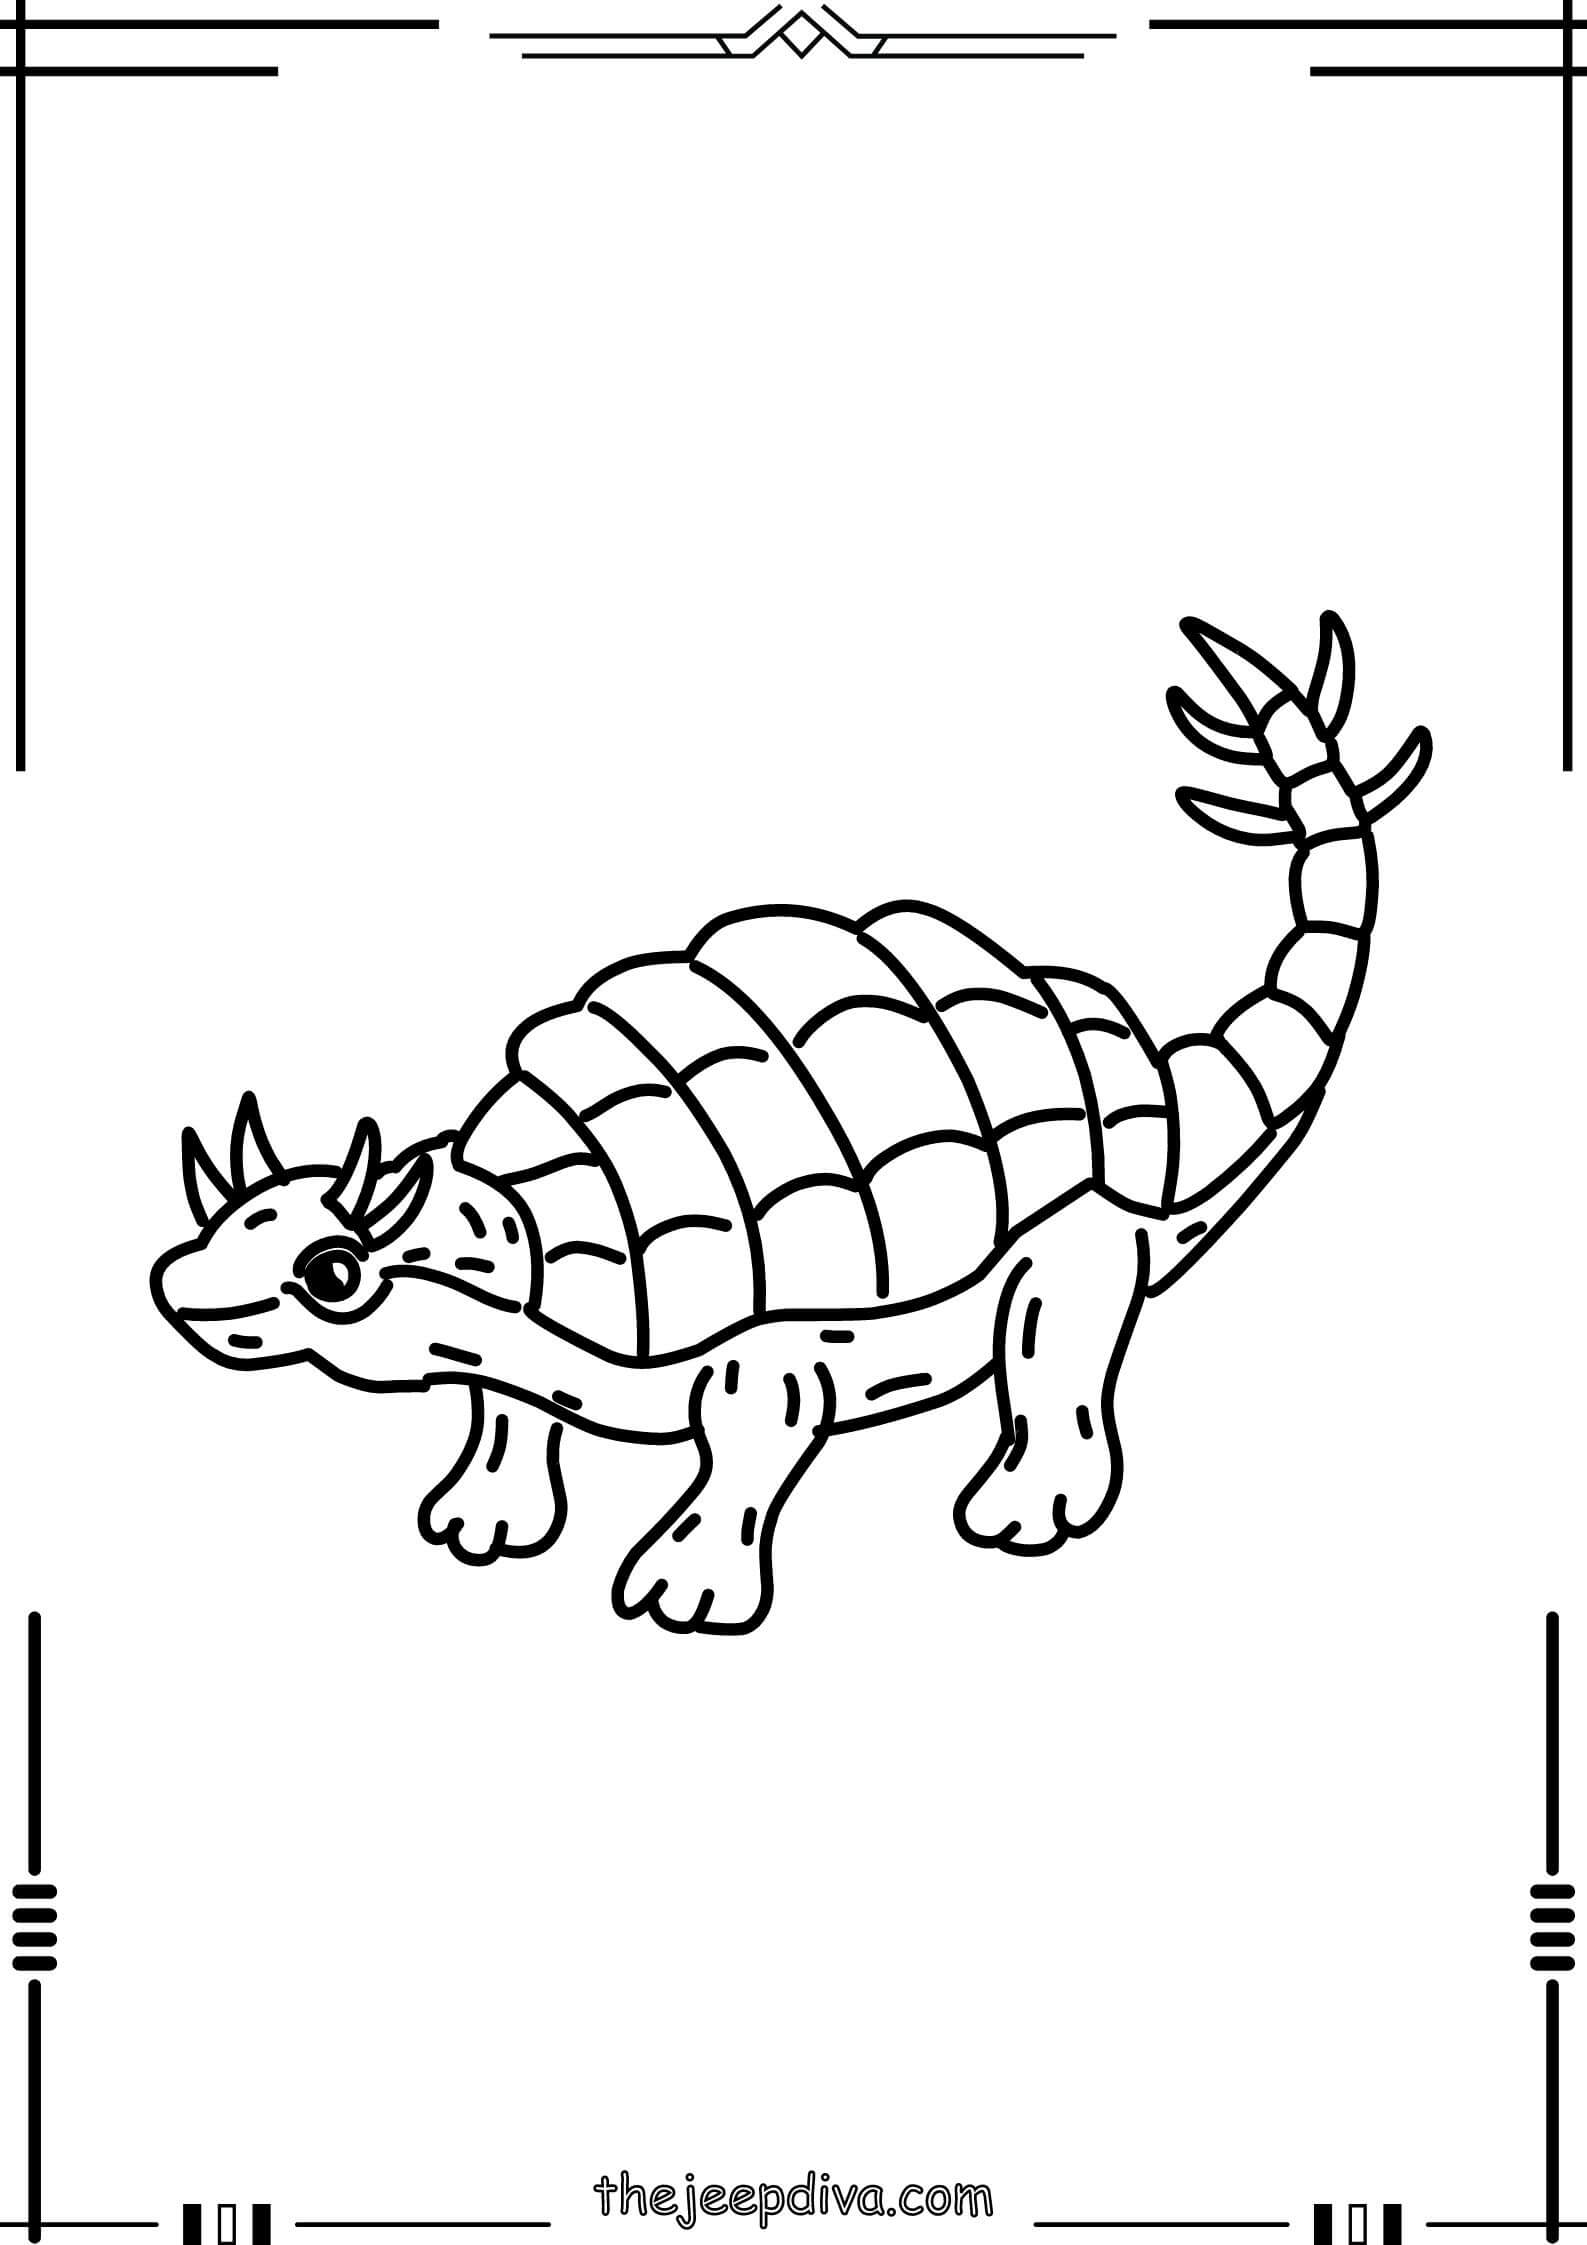 Dinosaur-Colouring-Pages-Easy-4